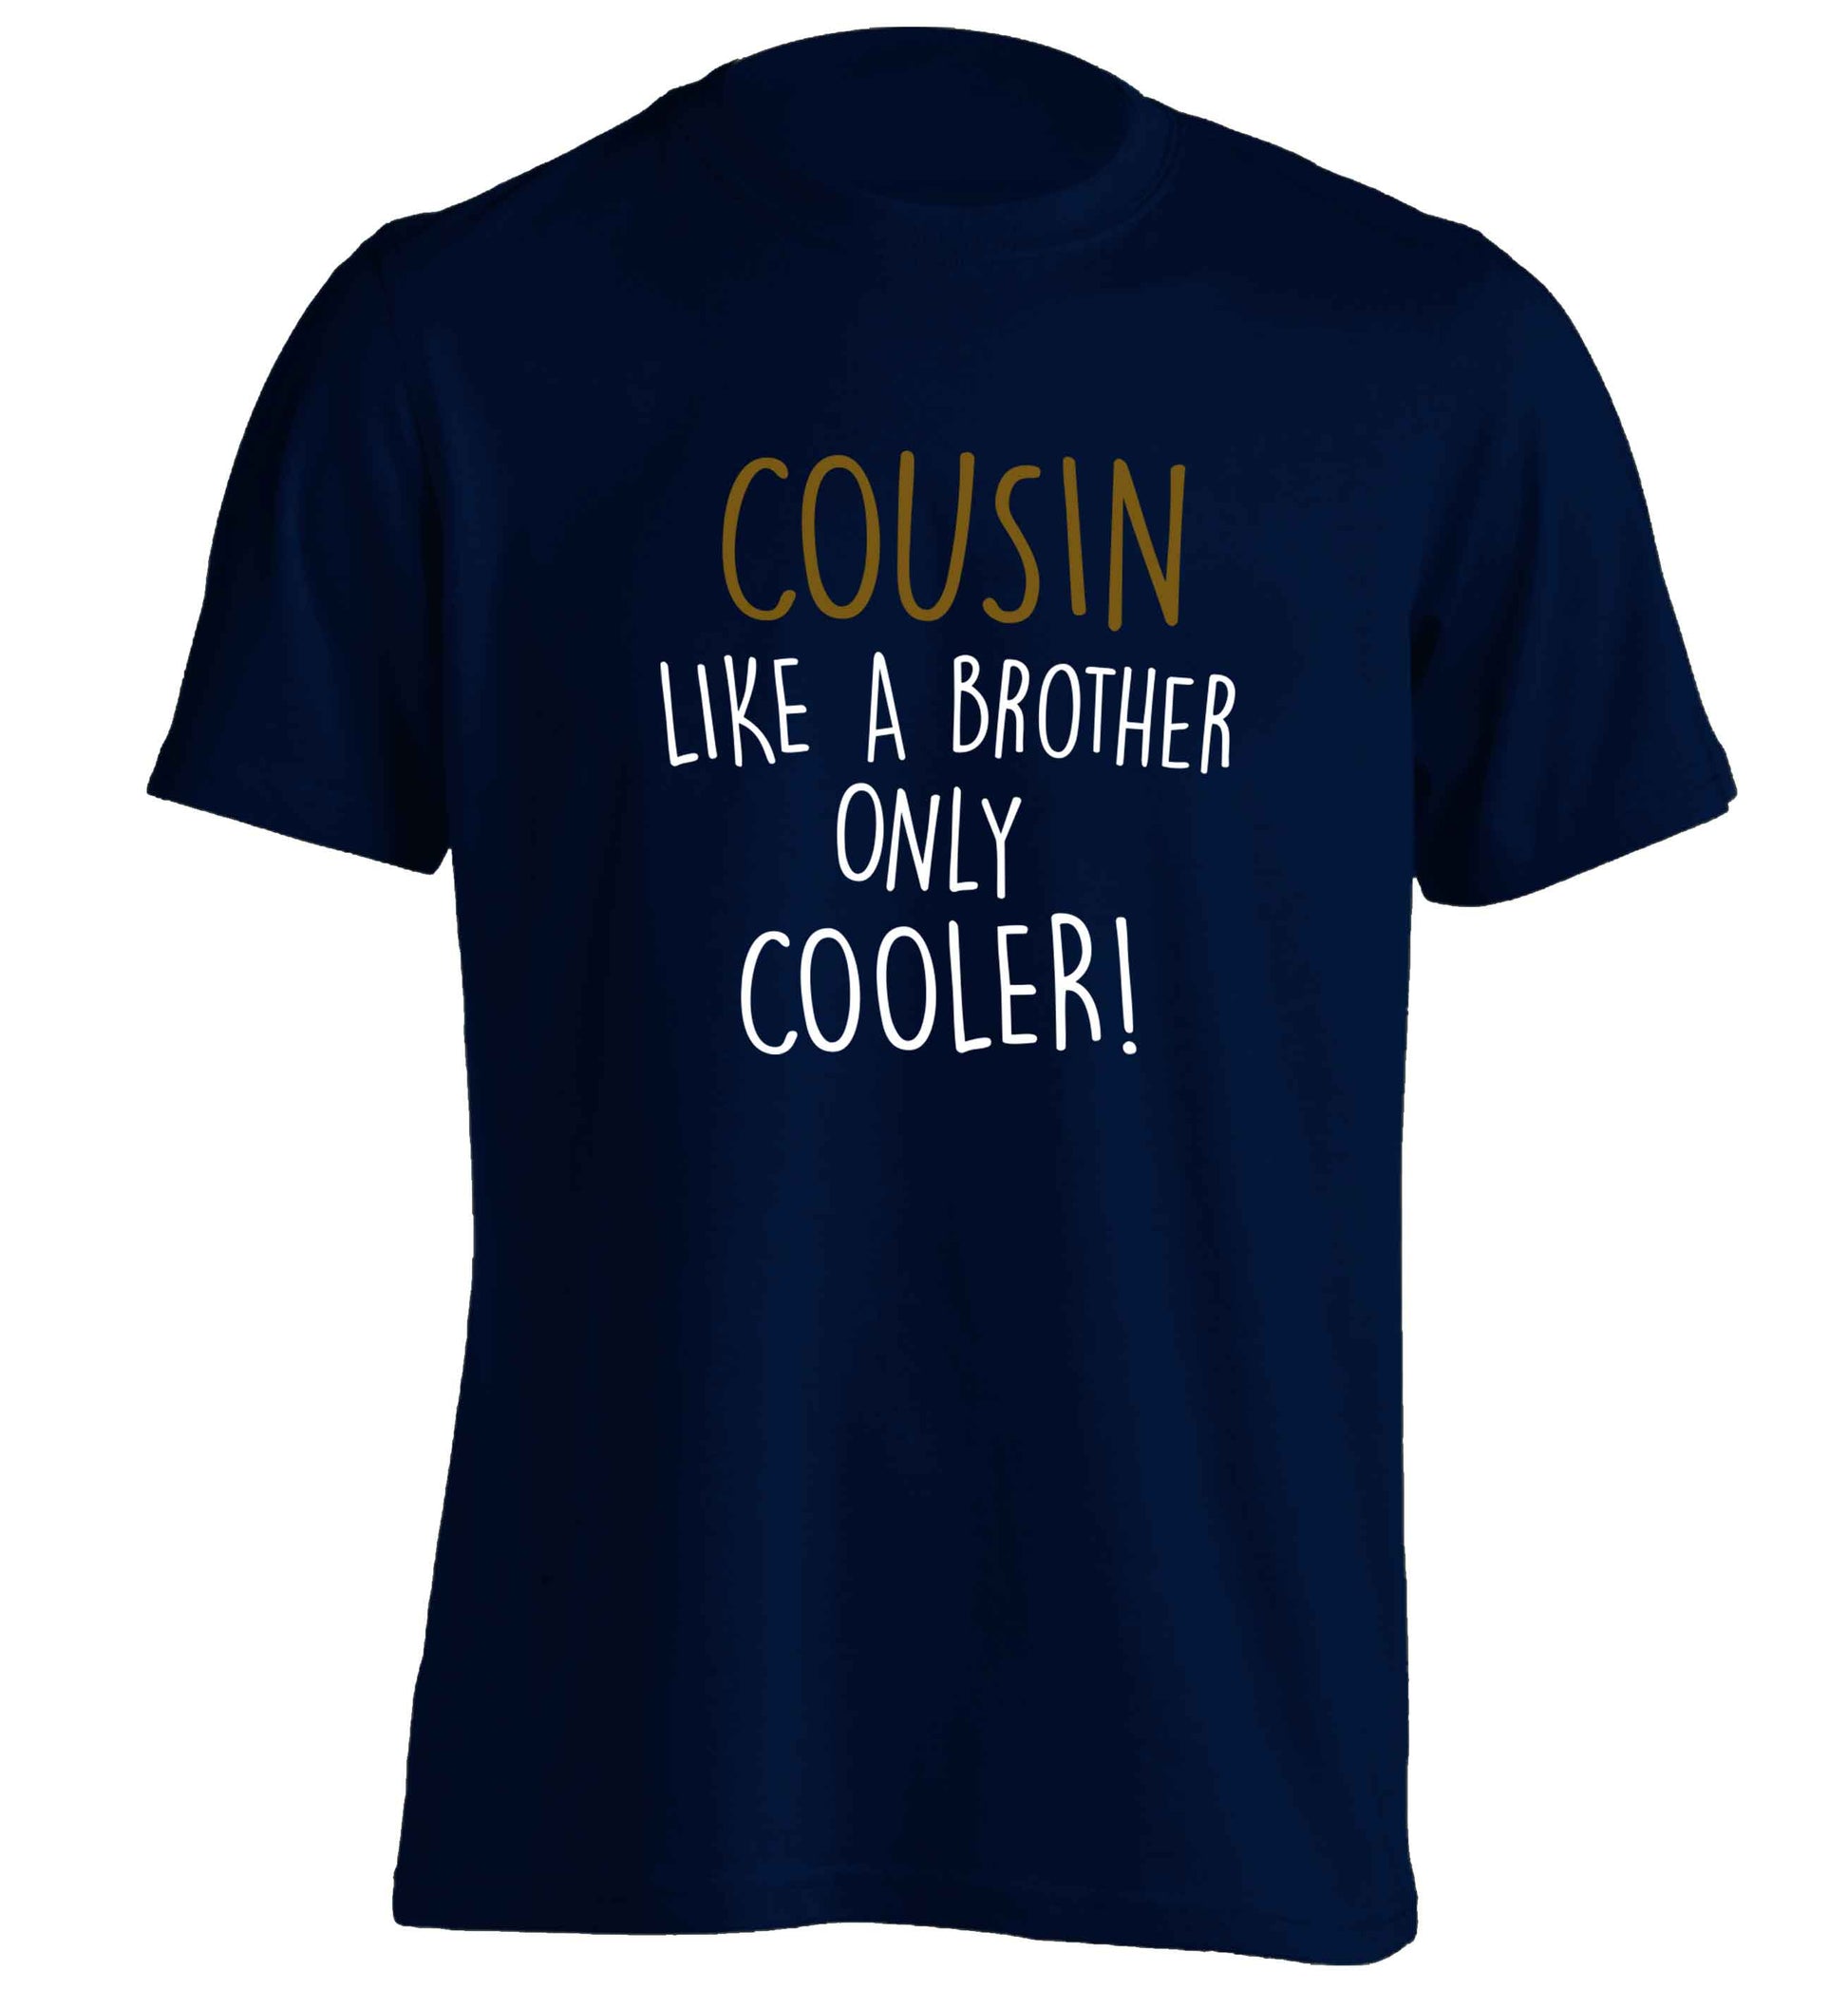 Cousin like a brother only cooler adults unisex navy Tshirt 2XL